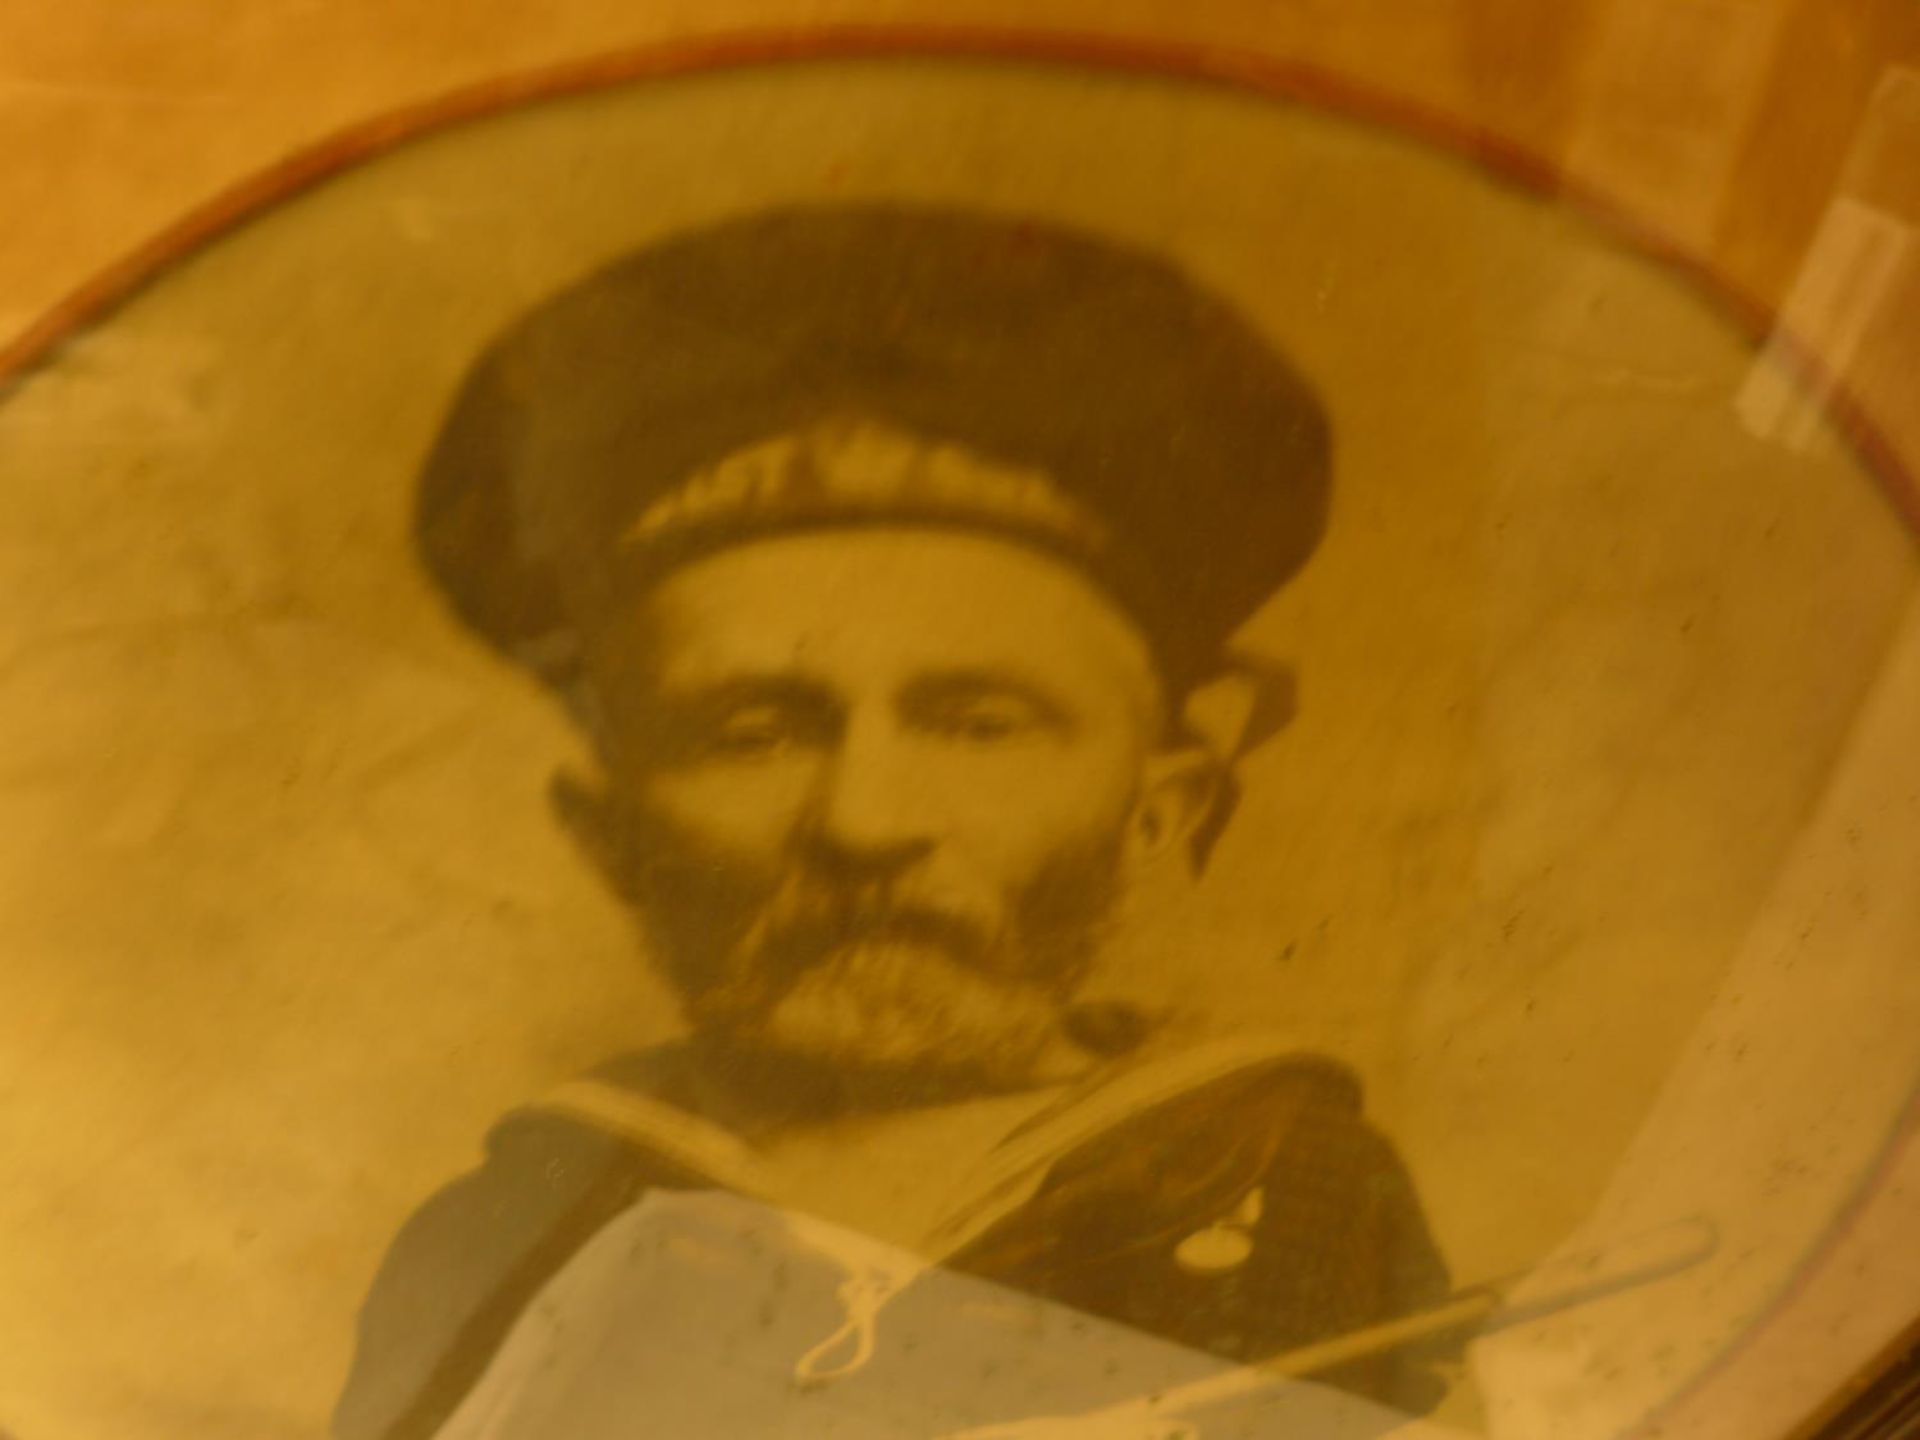 AN EARLY 20TH CENTURY FRAMED BLACK AND WHITE PHOTOGRAPH OF A SAILOR - Image 2 of 2